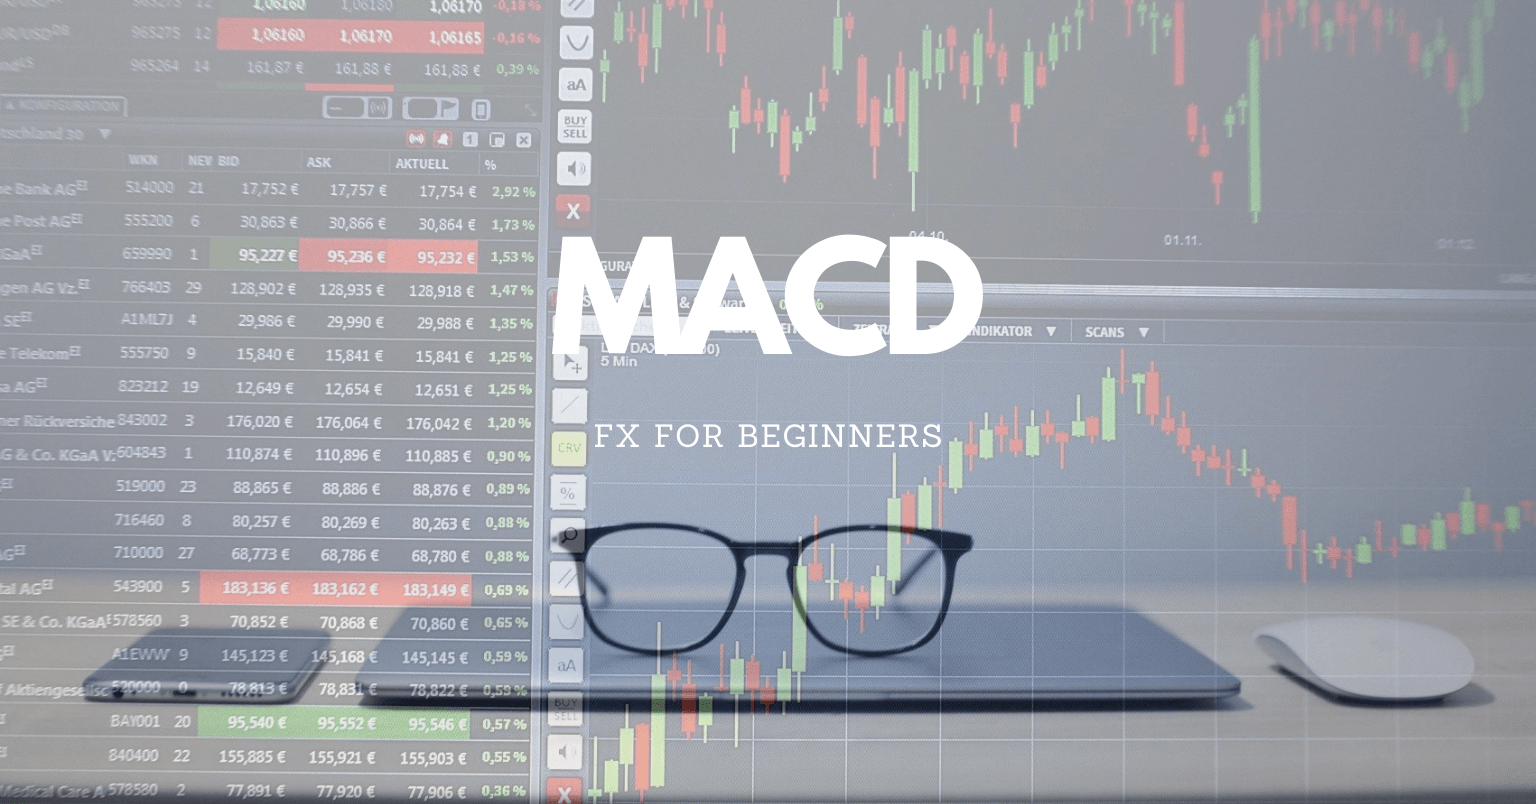 MACD(Moving Average Convergence Divergence)